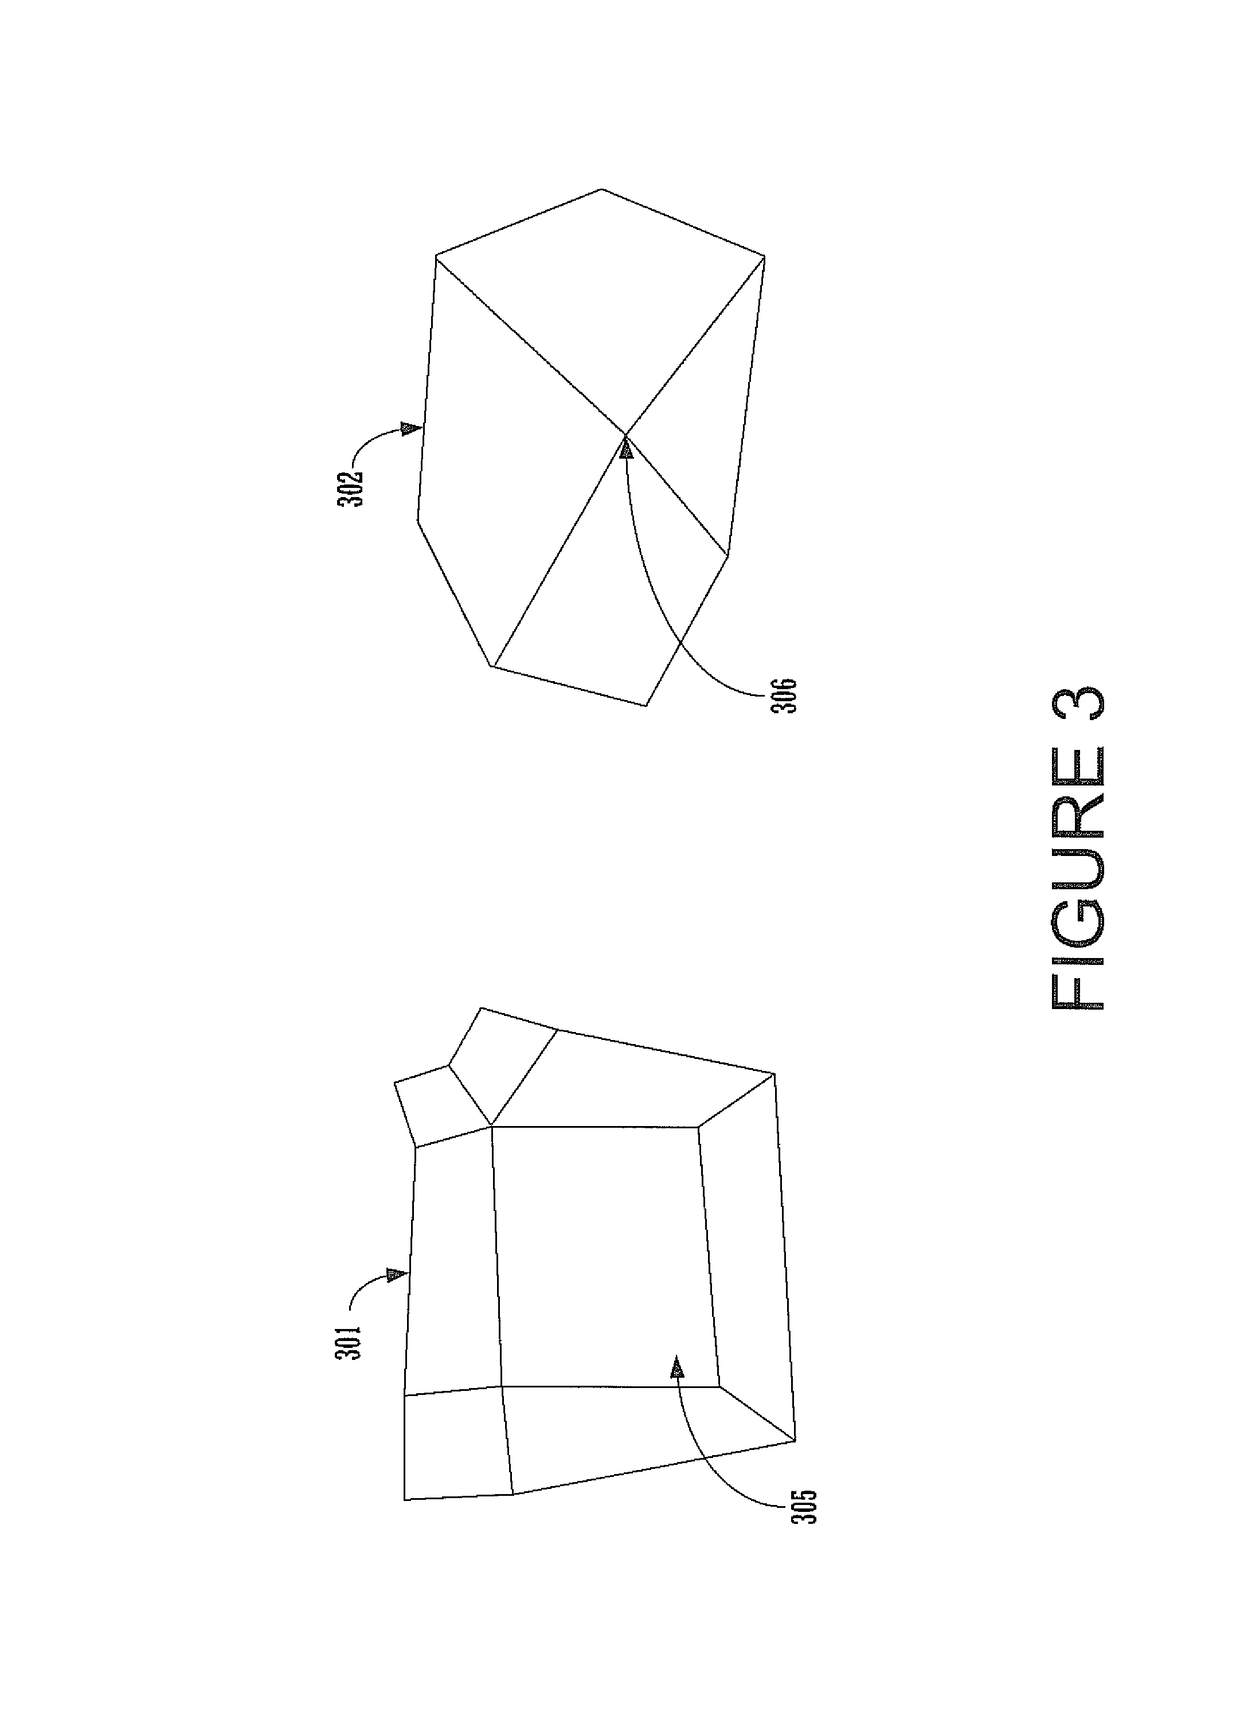 Method and system for tessellation of subdivision surfaces